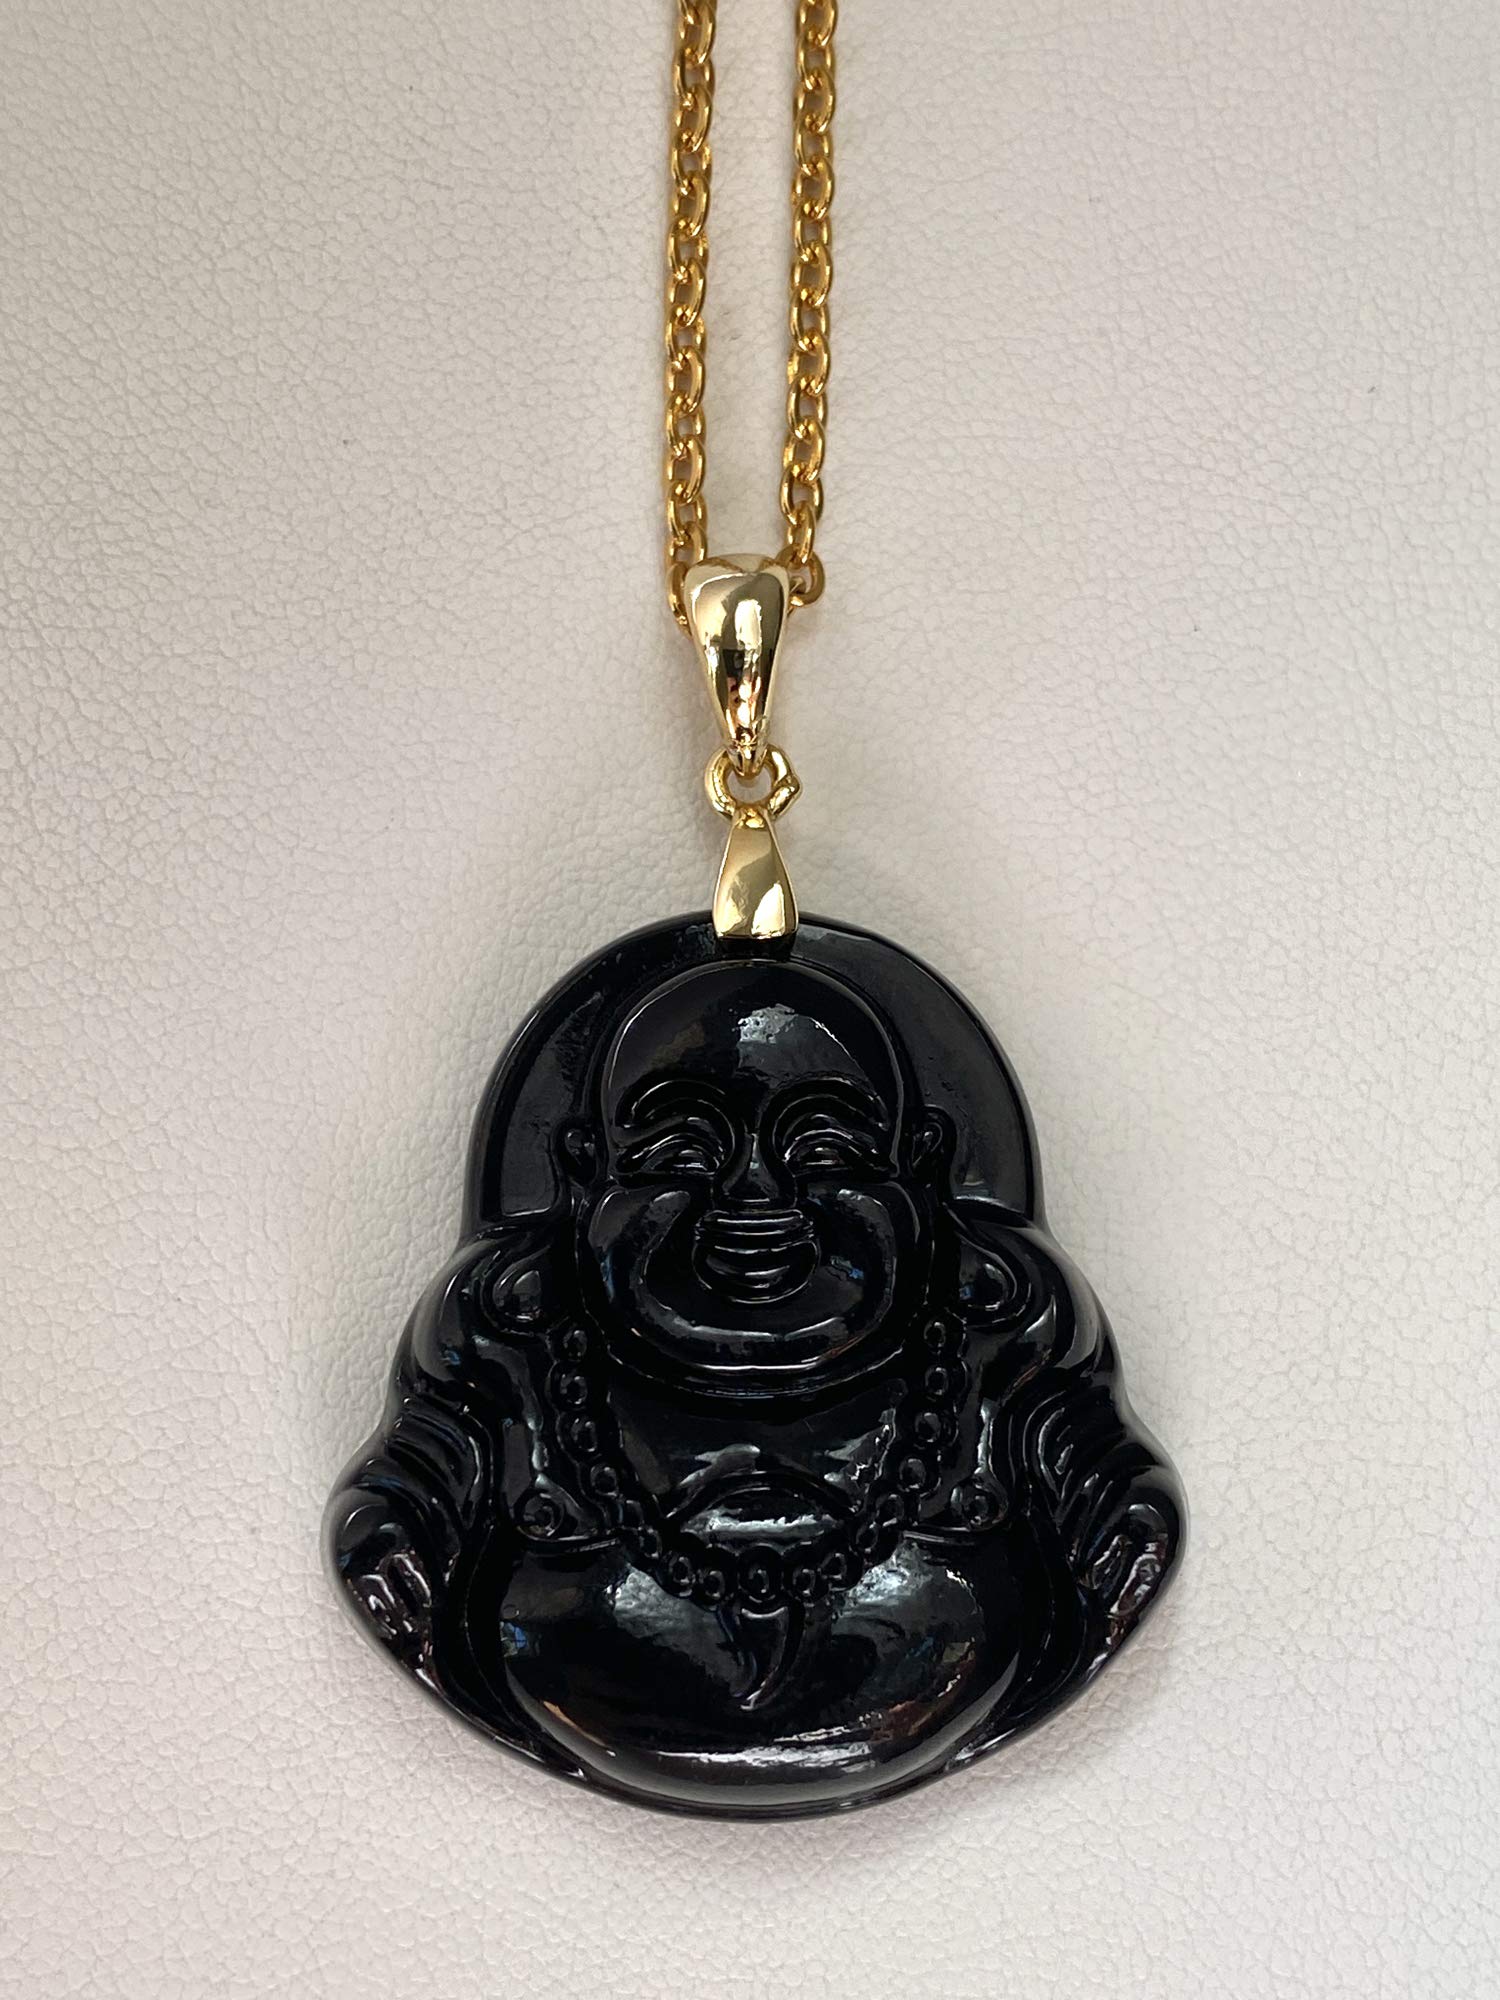 Shop-iGold Happy Laughing Buddha Black Jade Pendant Necklace Open Rolo Box Chain Genuine Certified Grade A Jadeite Jade Hand Crafted